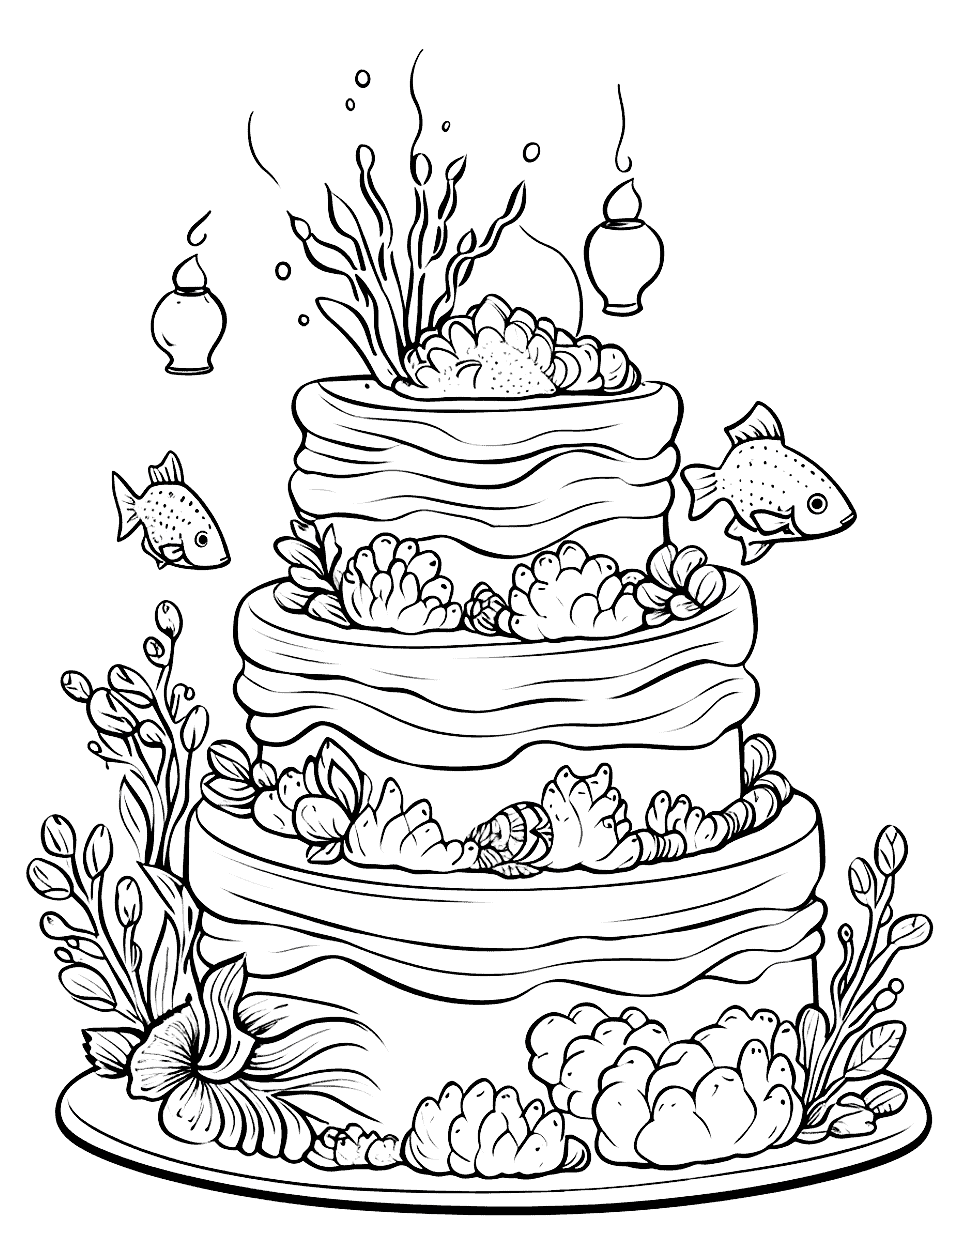 Deep Sea Diving Cake Coloring Page - A cake with an ocean depths theme, including fish and other decorations.